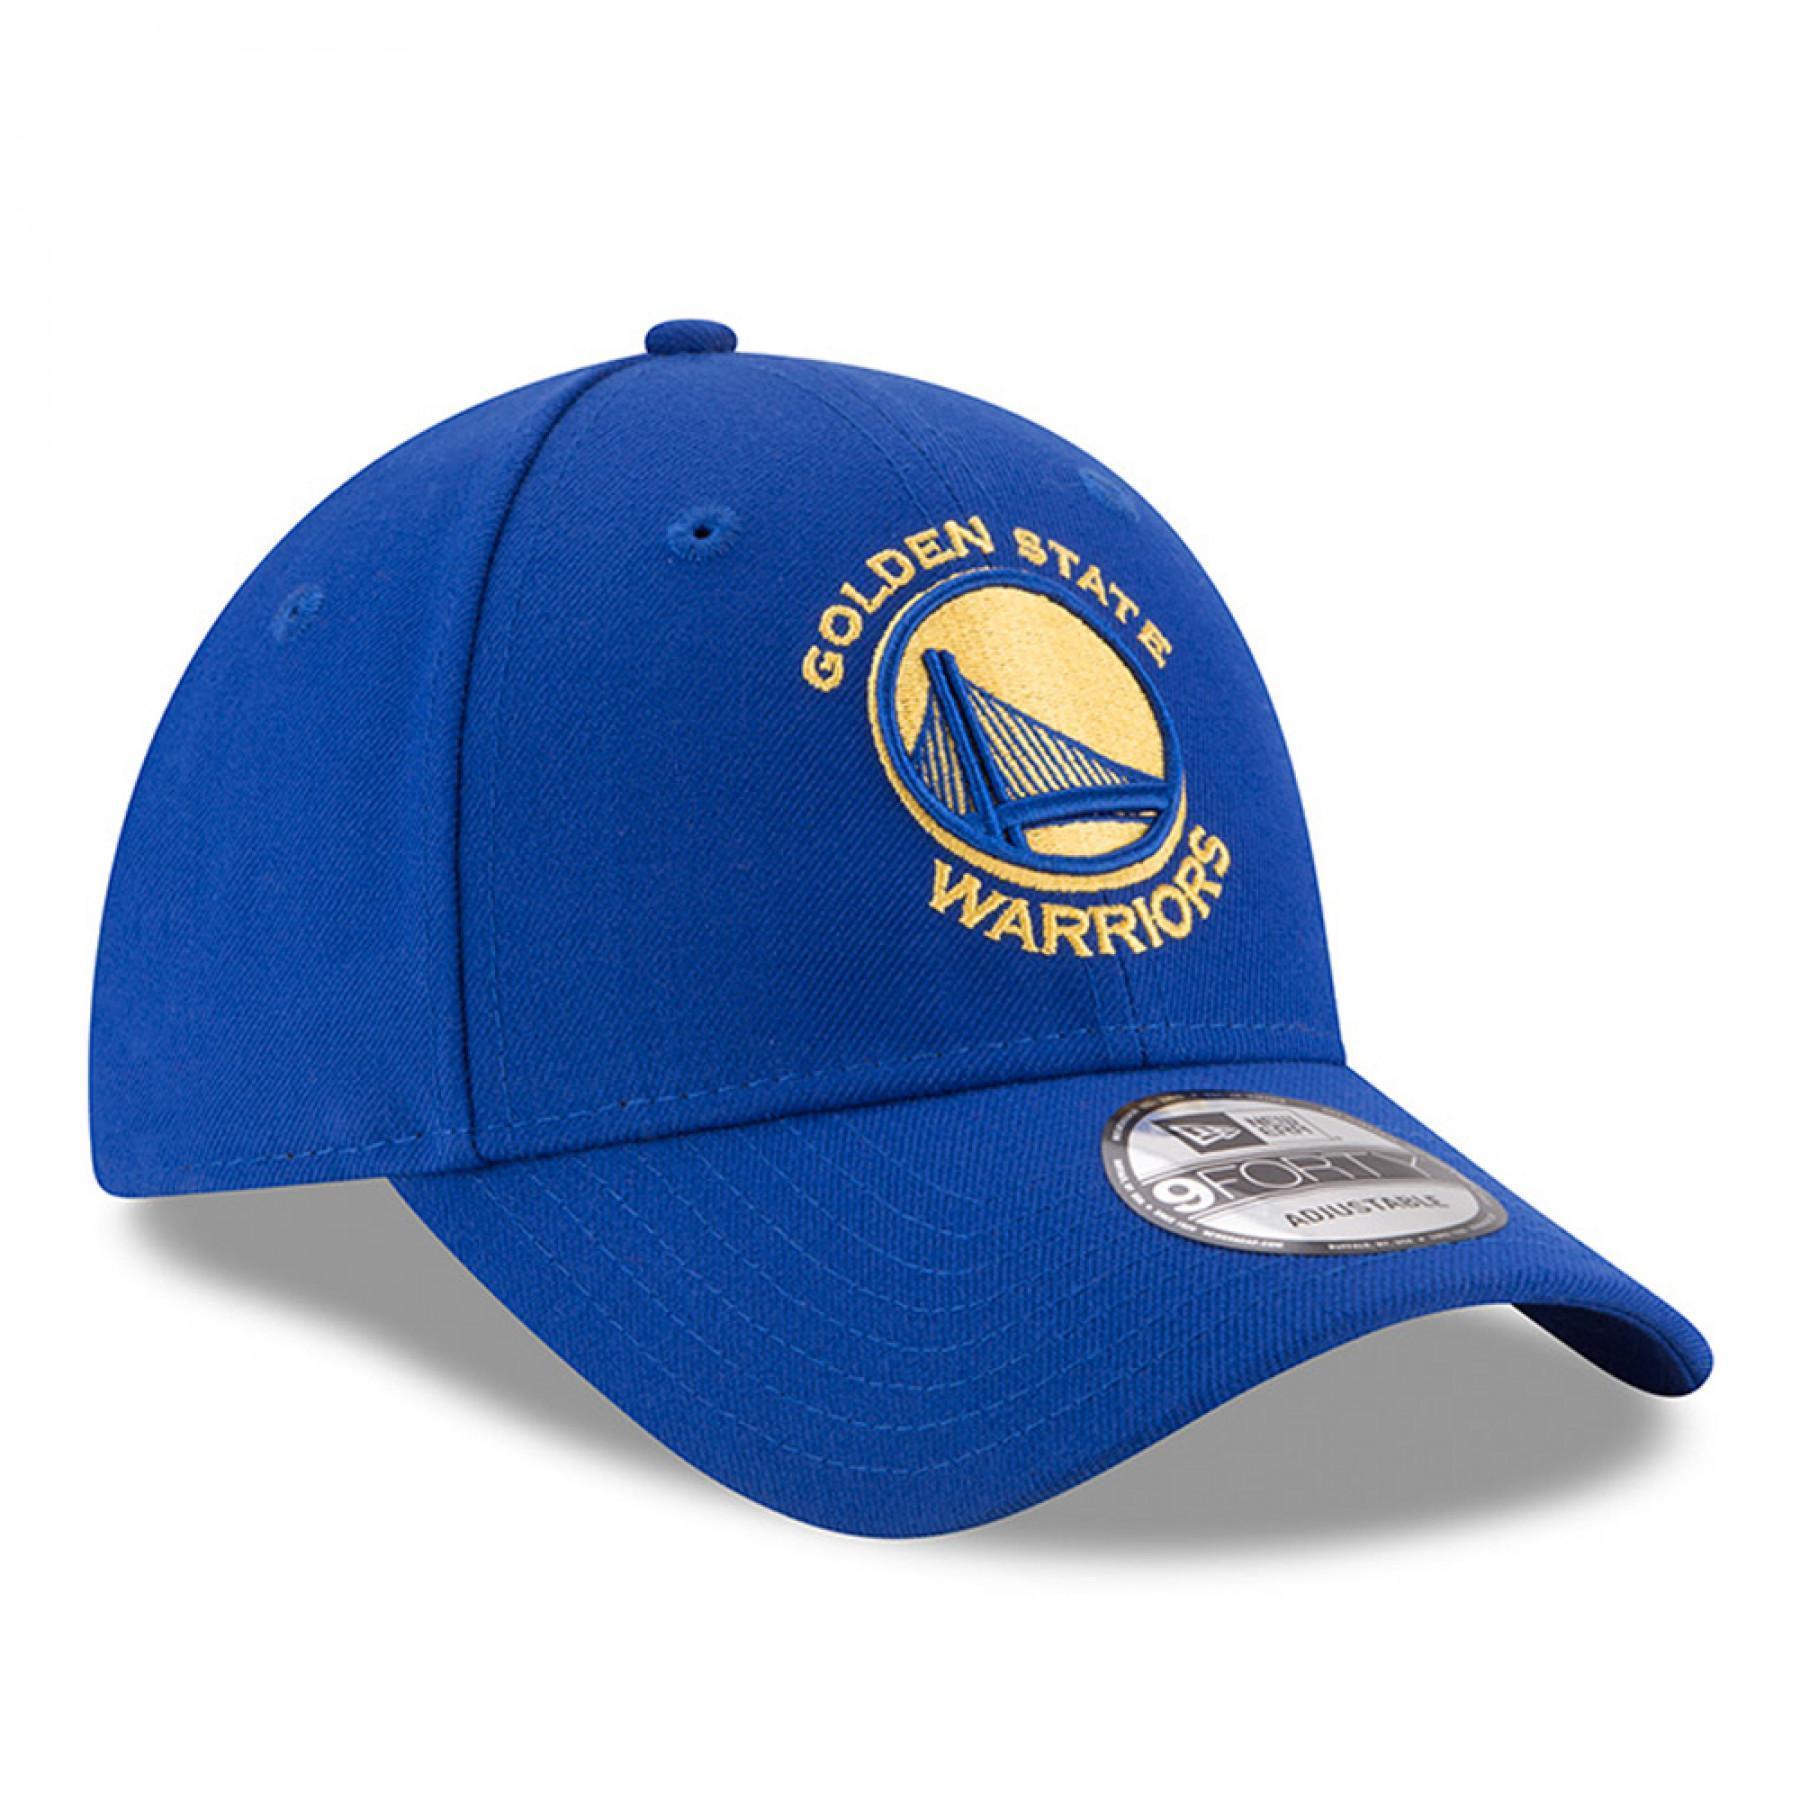 Pet New Era  The League 9forty Golden State Warriors